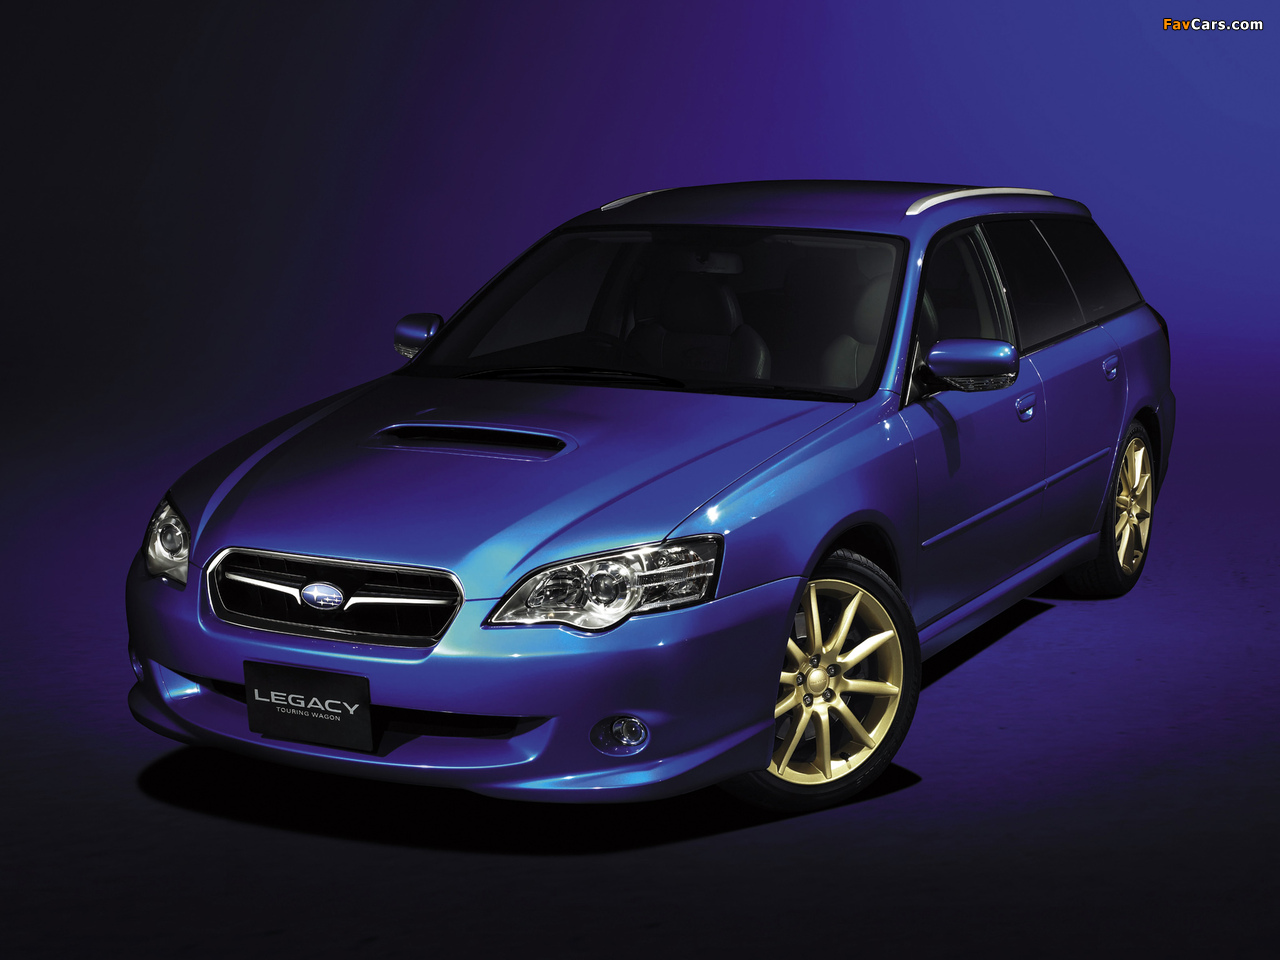 Subaru Legacy 2.0 GT spec.B WR-Limited Touring Wagon 2005 images (1280 x 960)